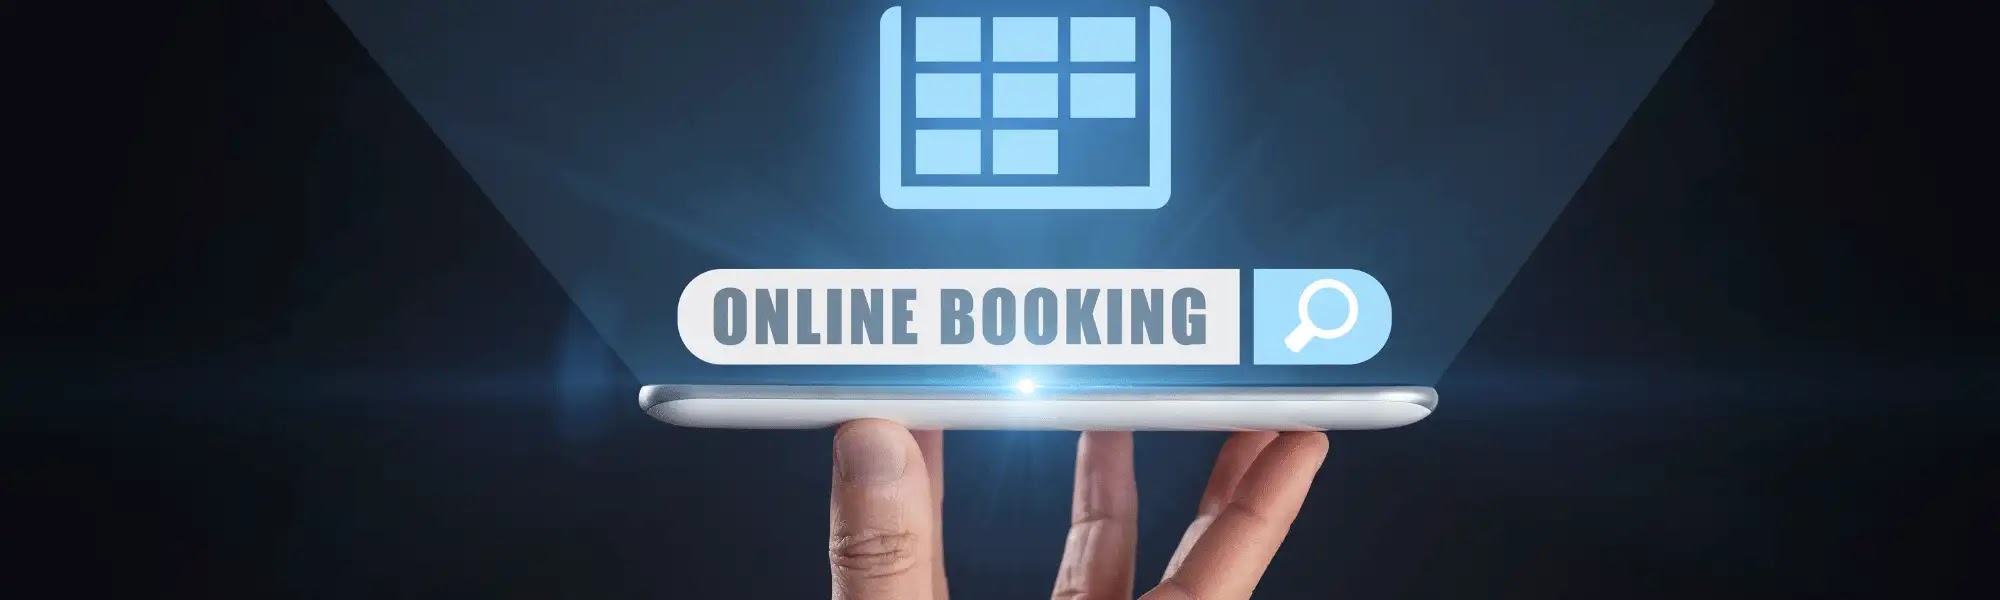 online-booking-and-reservation